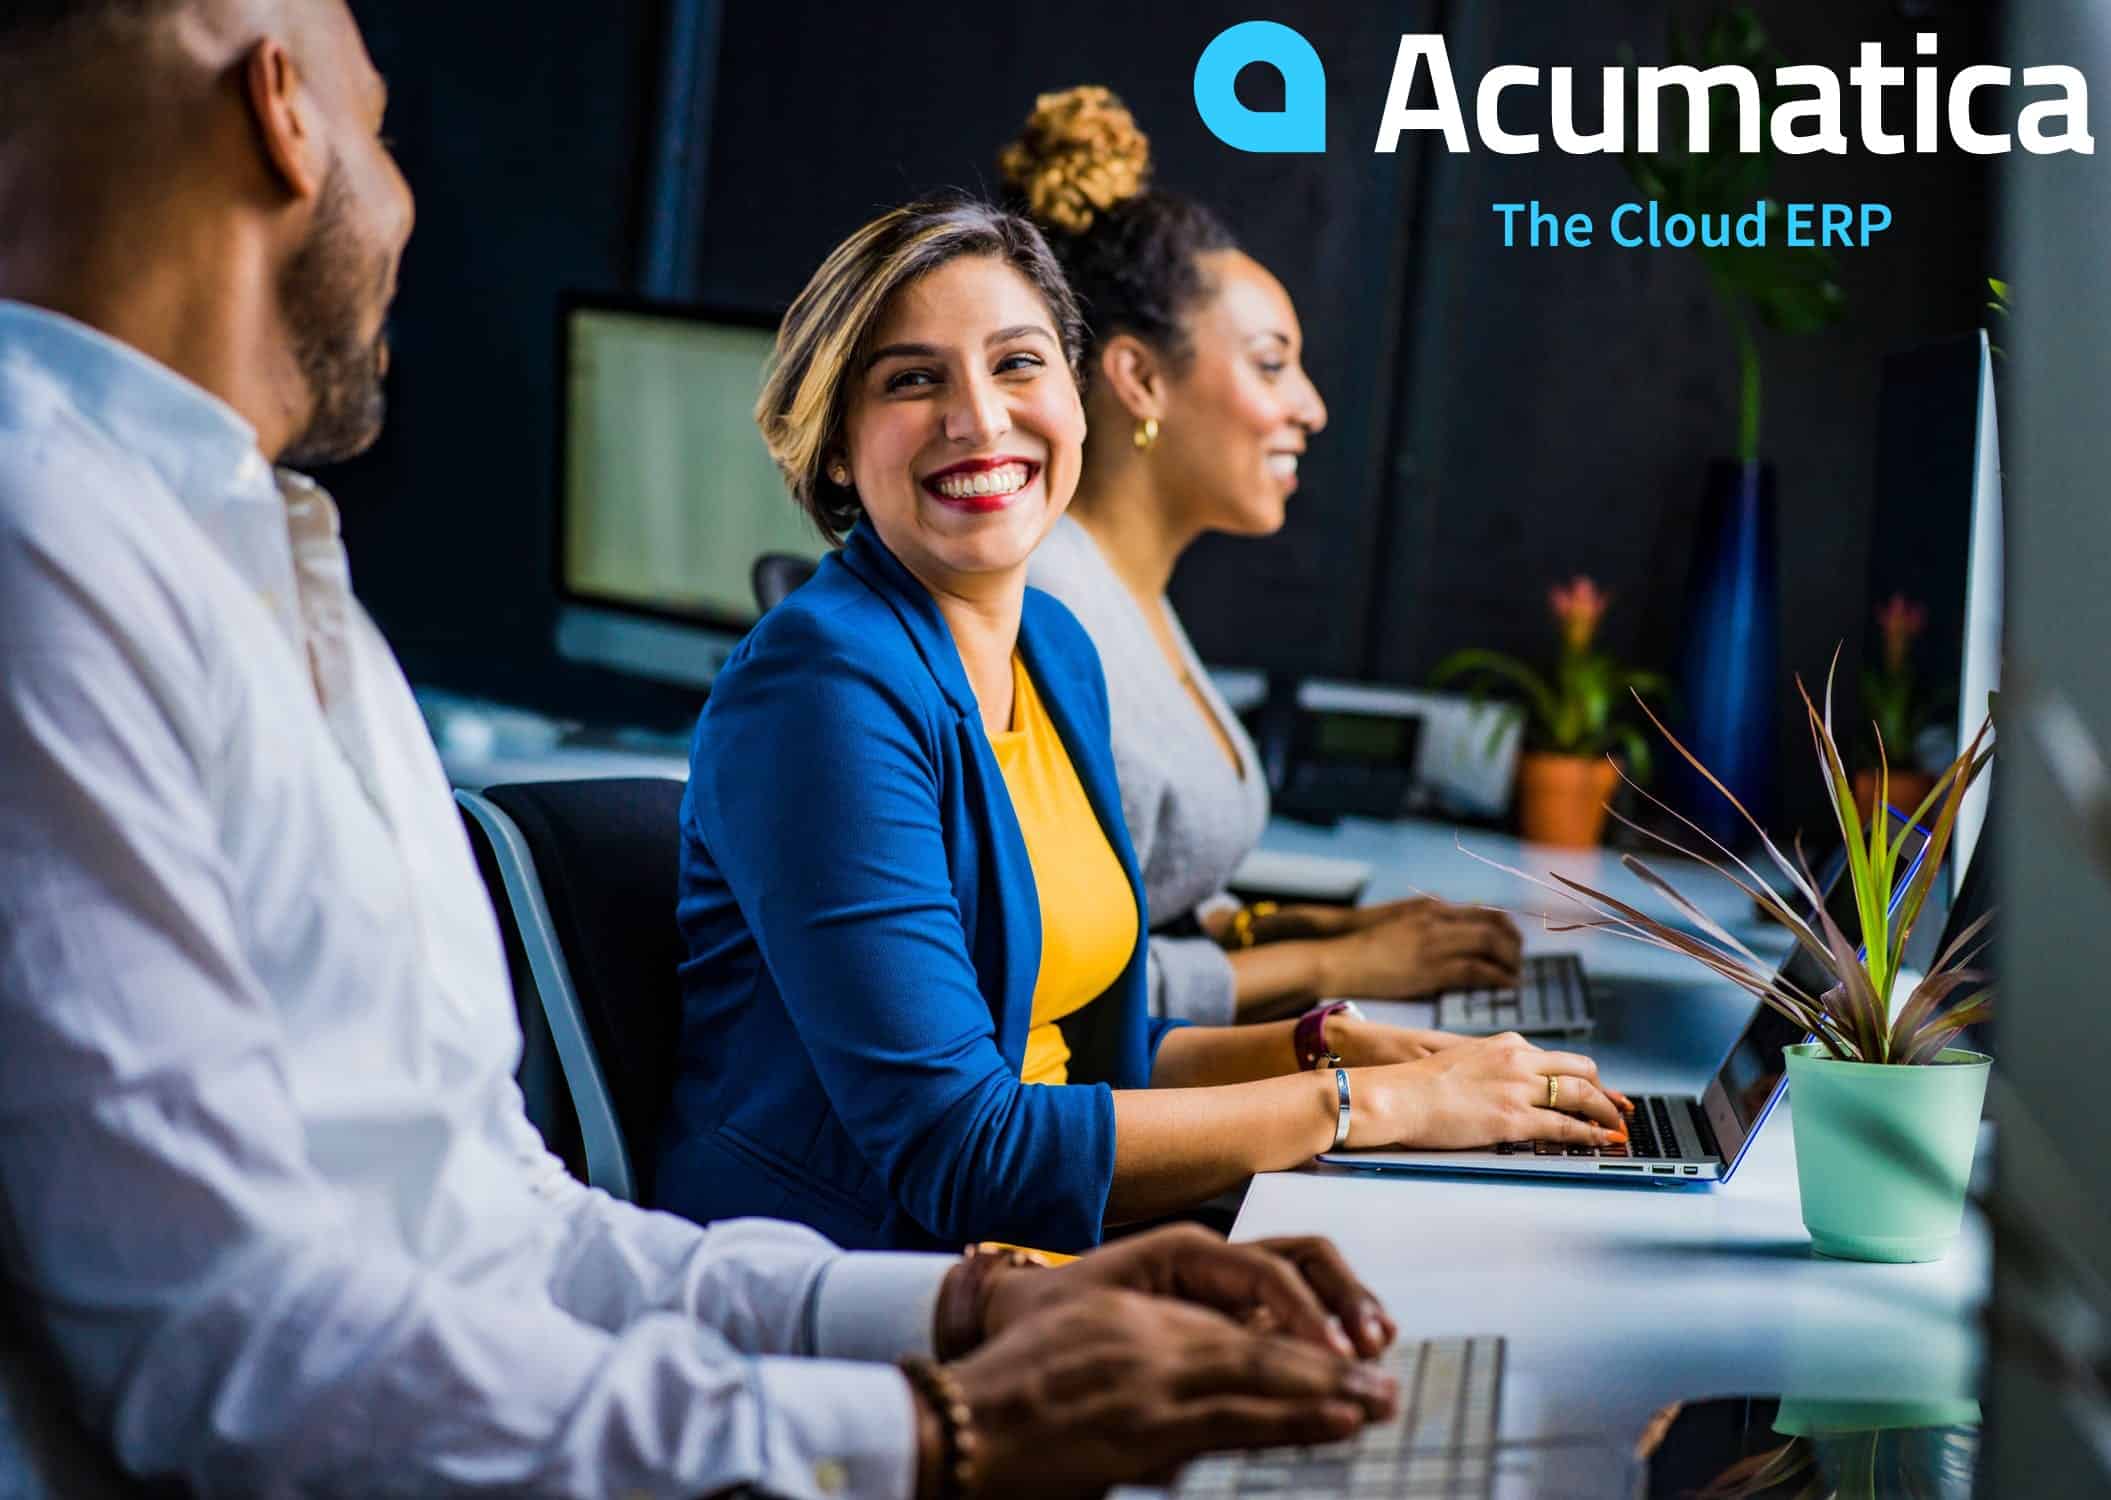 A comprehensive analysis of multiple ERP reviews revealed that Acumatica captured the second overall spot for user satisfaction out 18 featured products, ranking just behind Oracle ERP Cloud and above Microsoft Dynamics 365 for Finance and Operations.